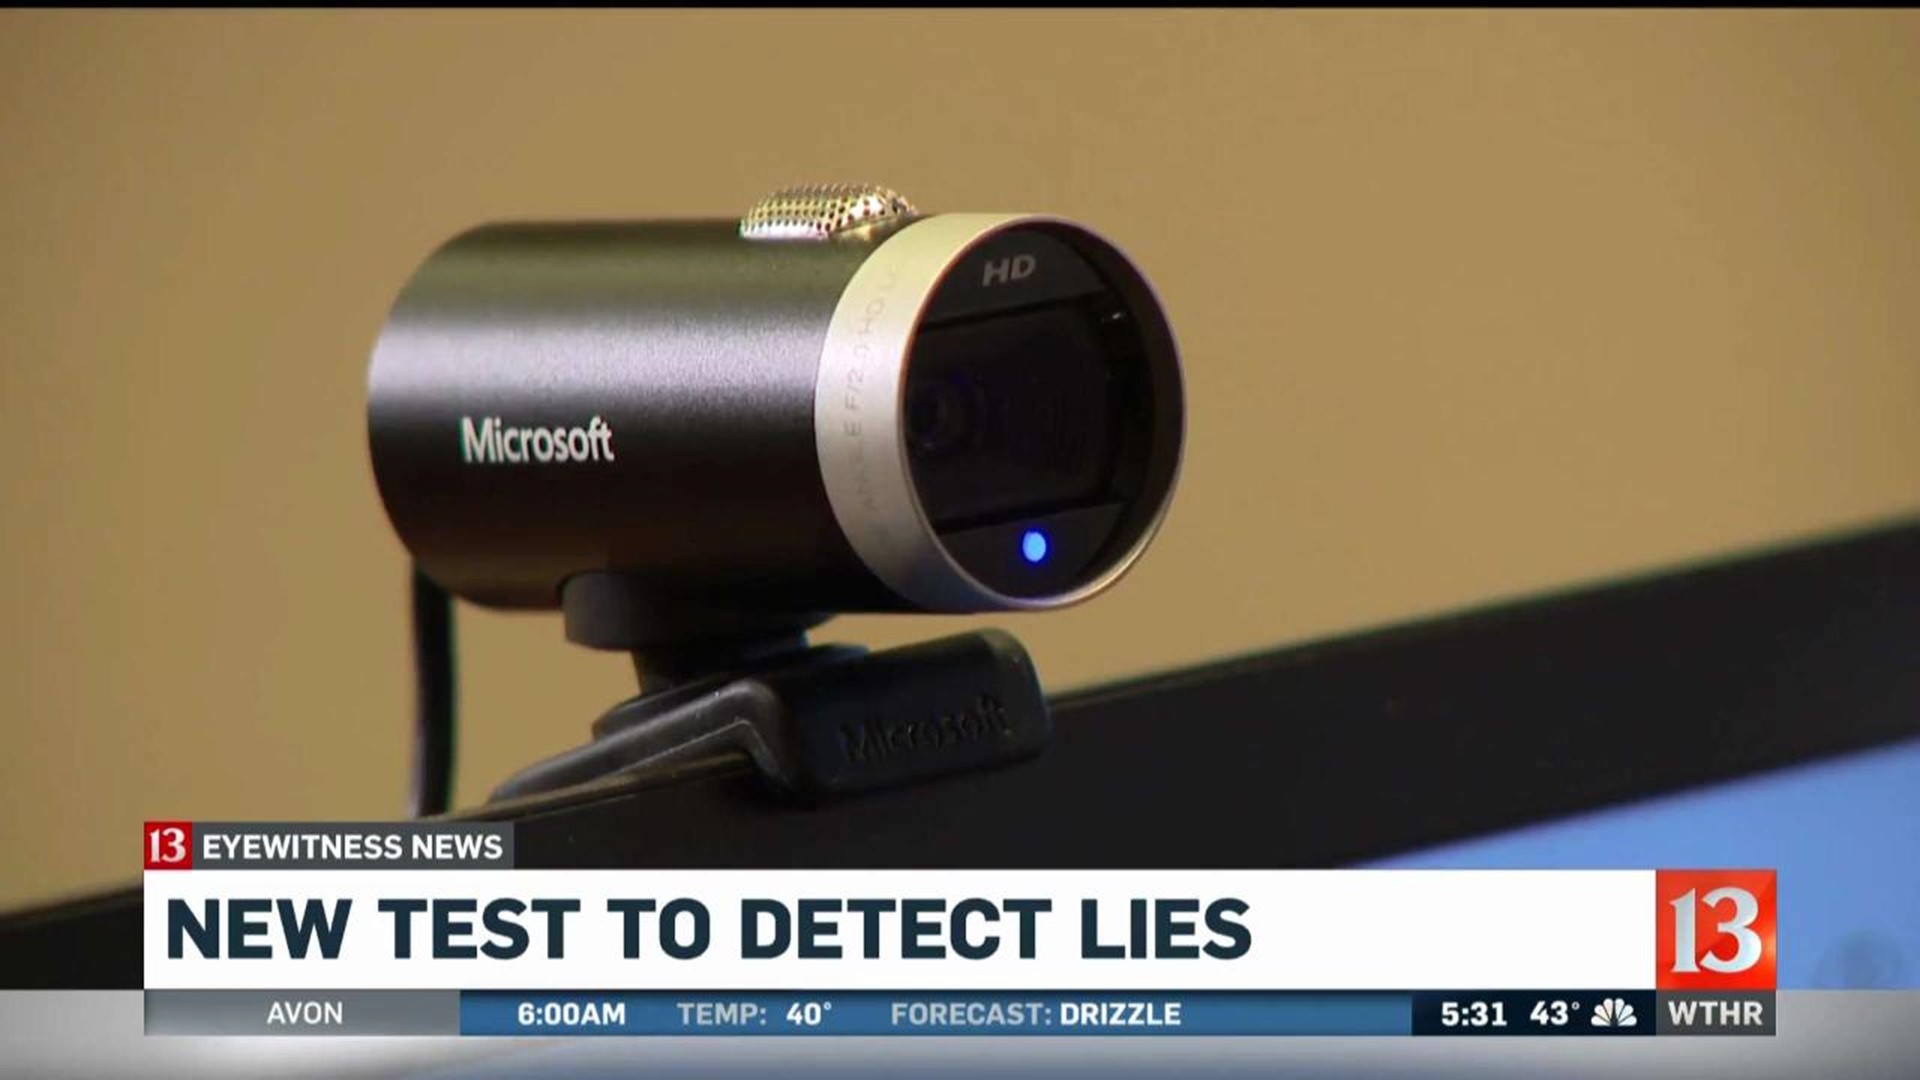 New test to detect lies